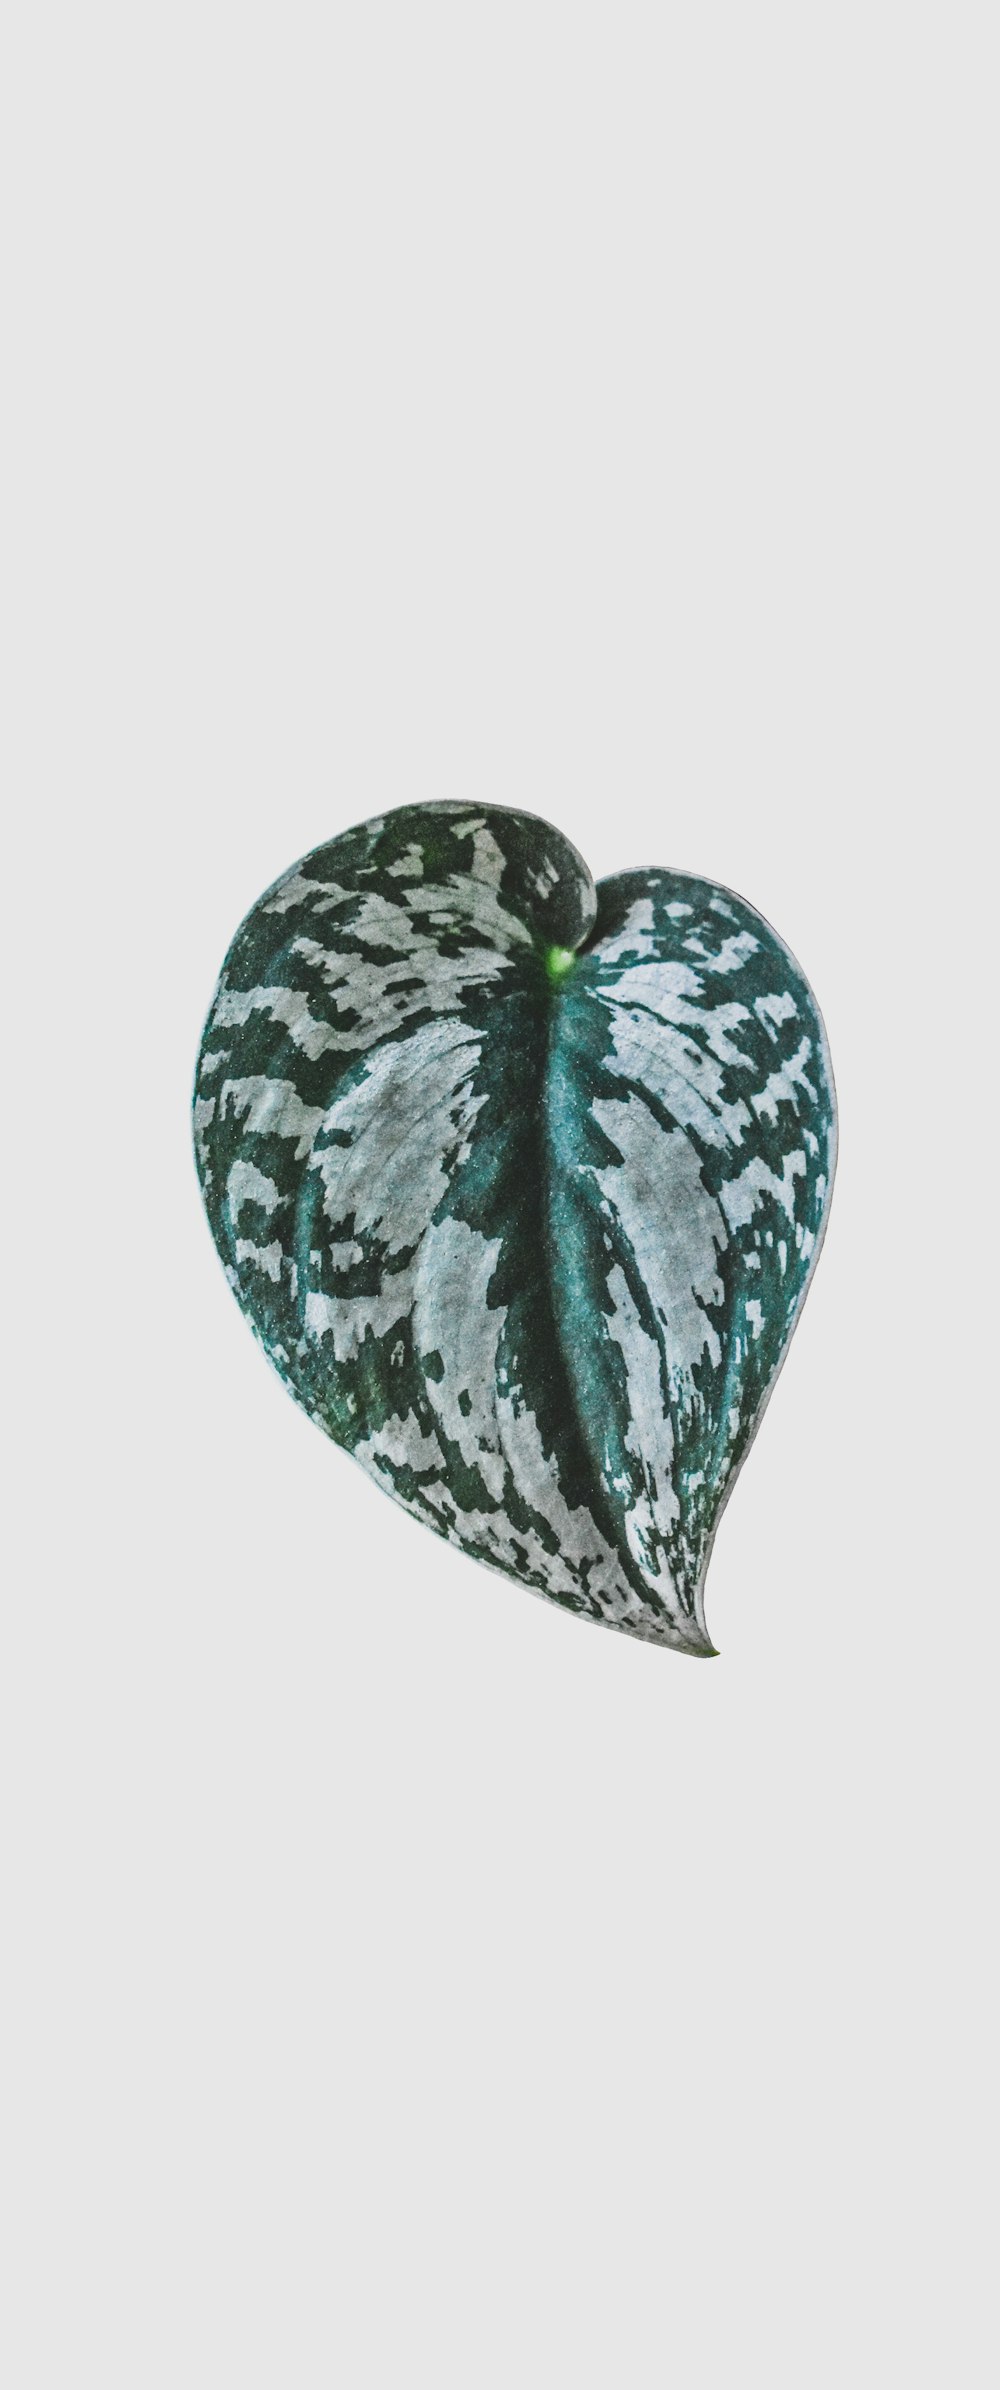 a green and white heart shaped plant on a white background